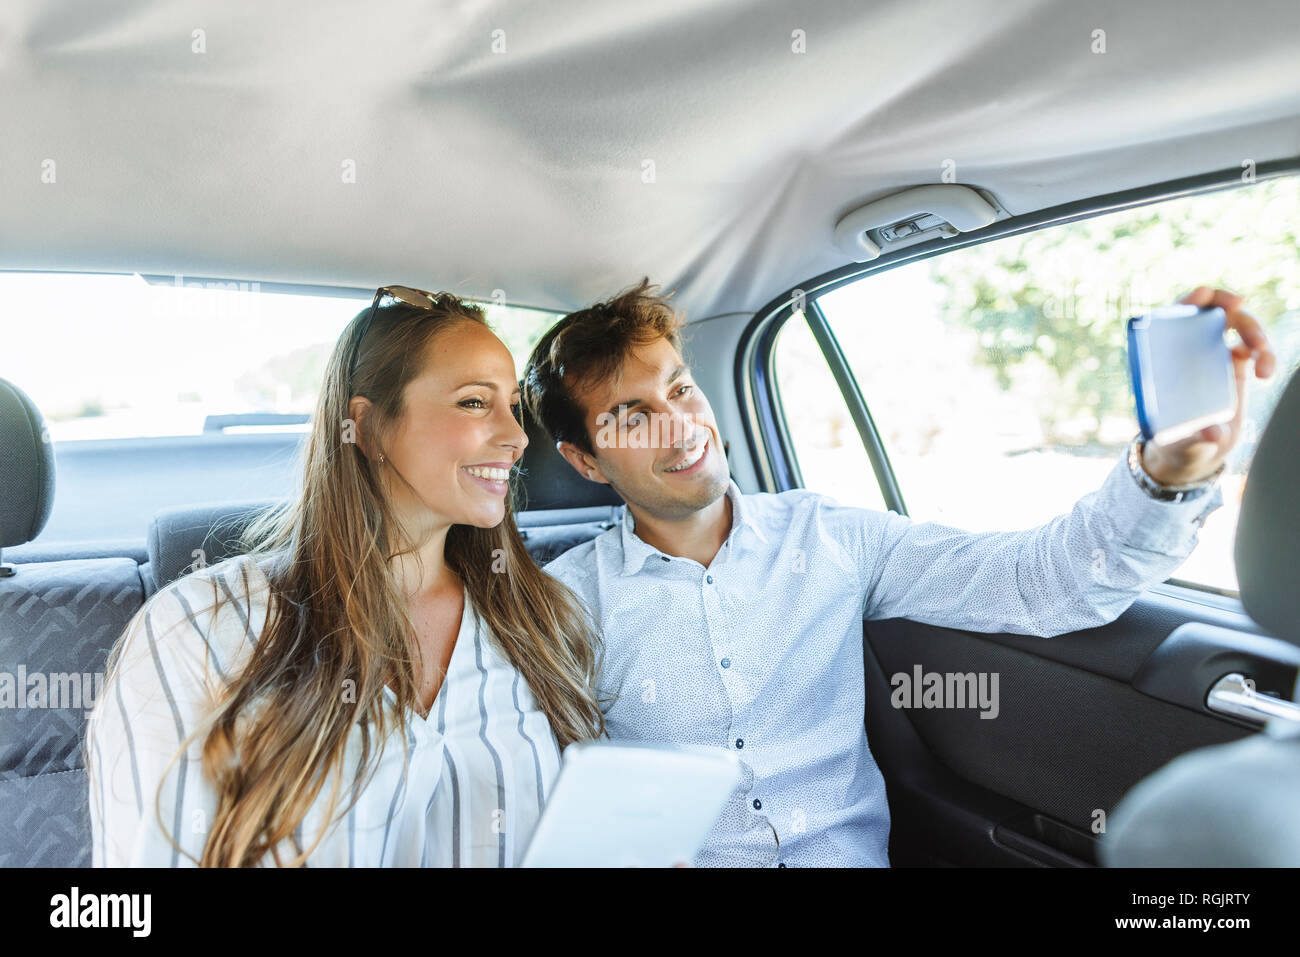 Smiling couple on back seat of a car taking a selfie Stock Photo